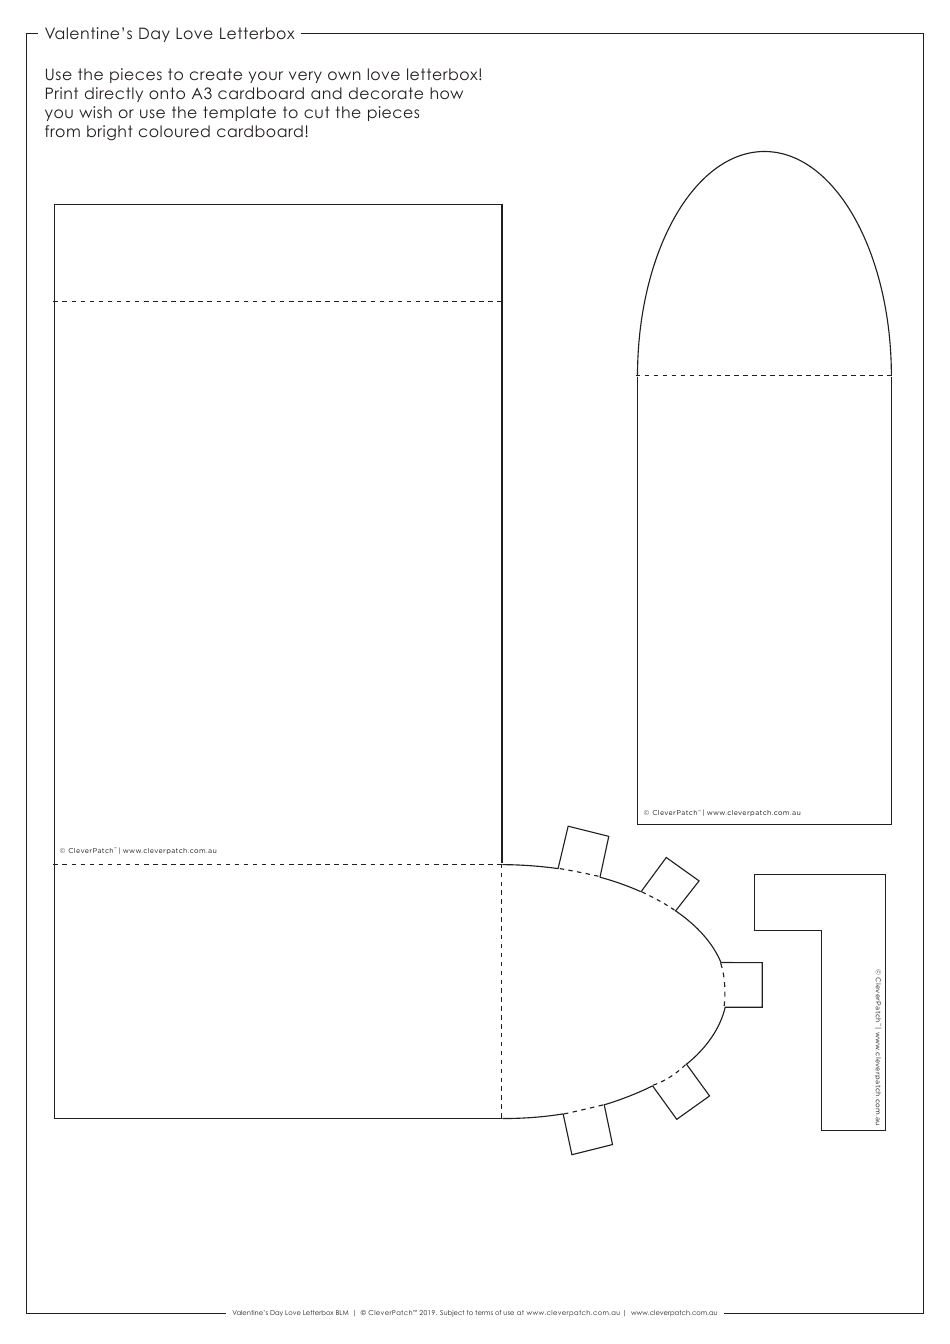 Valentine's Day Love Letterbox Template - Cleverpatch